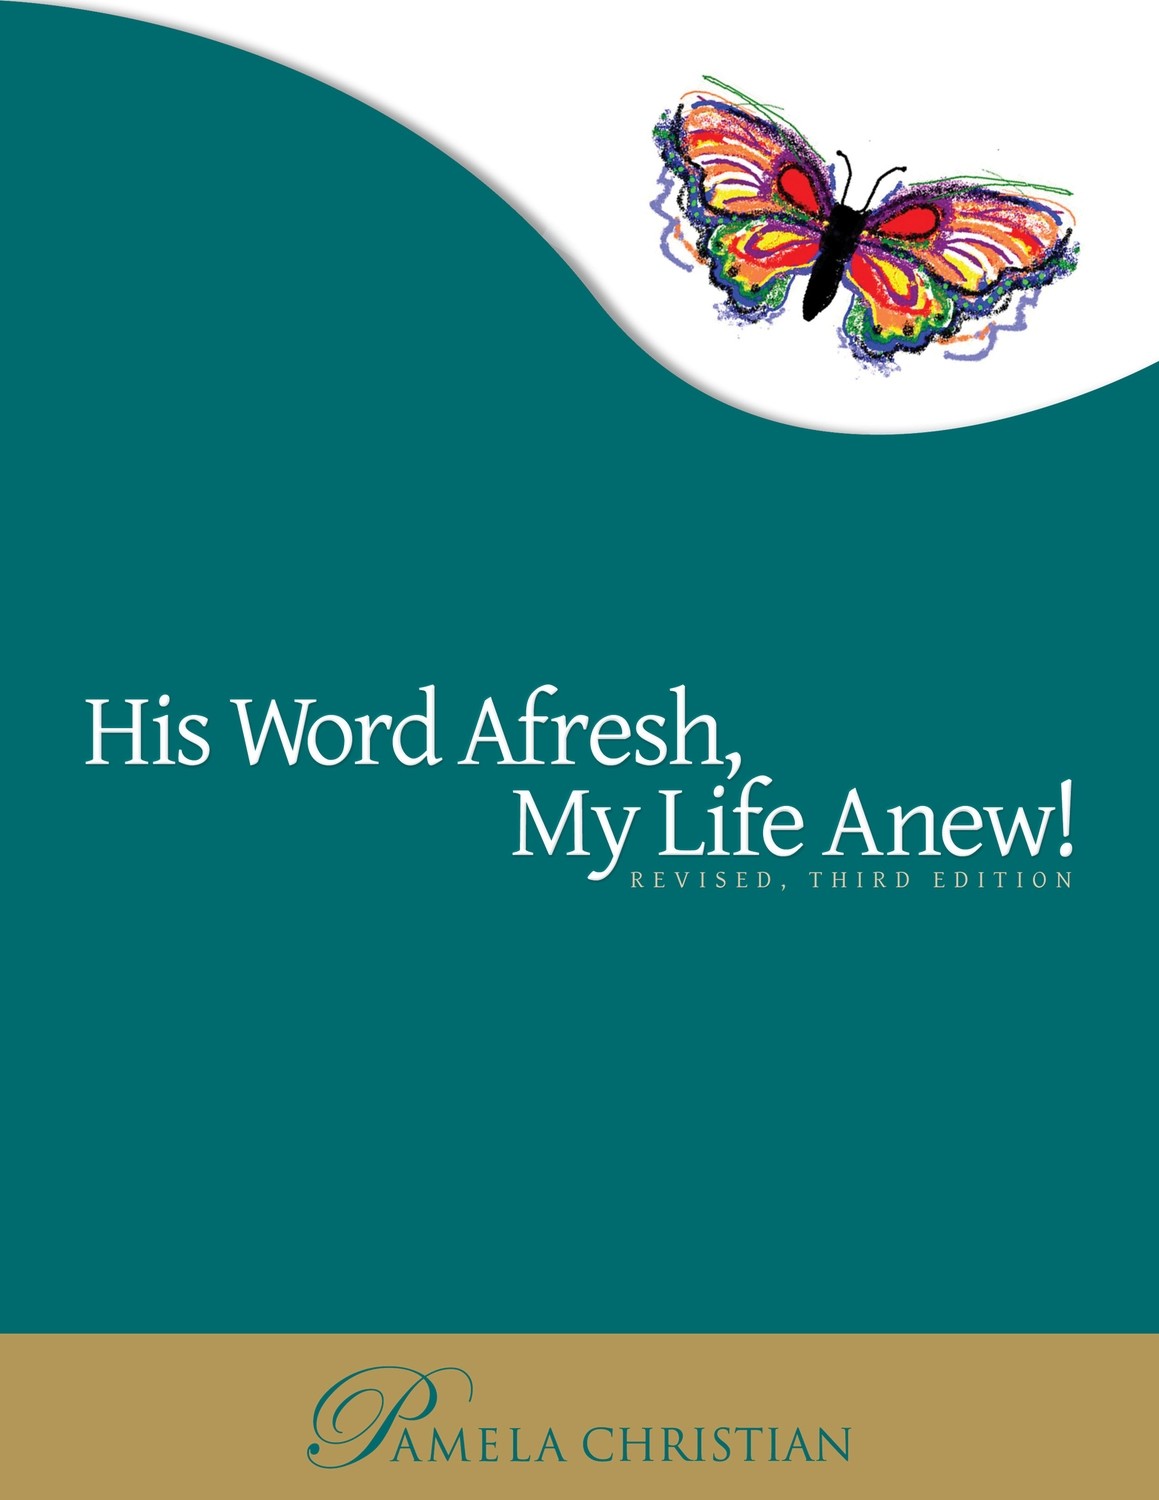 His Word Afresh, My Life Anew!